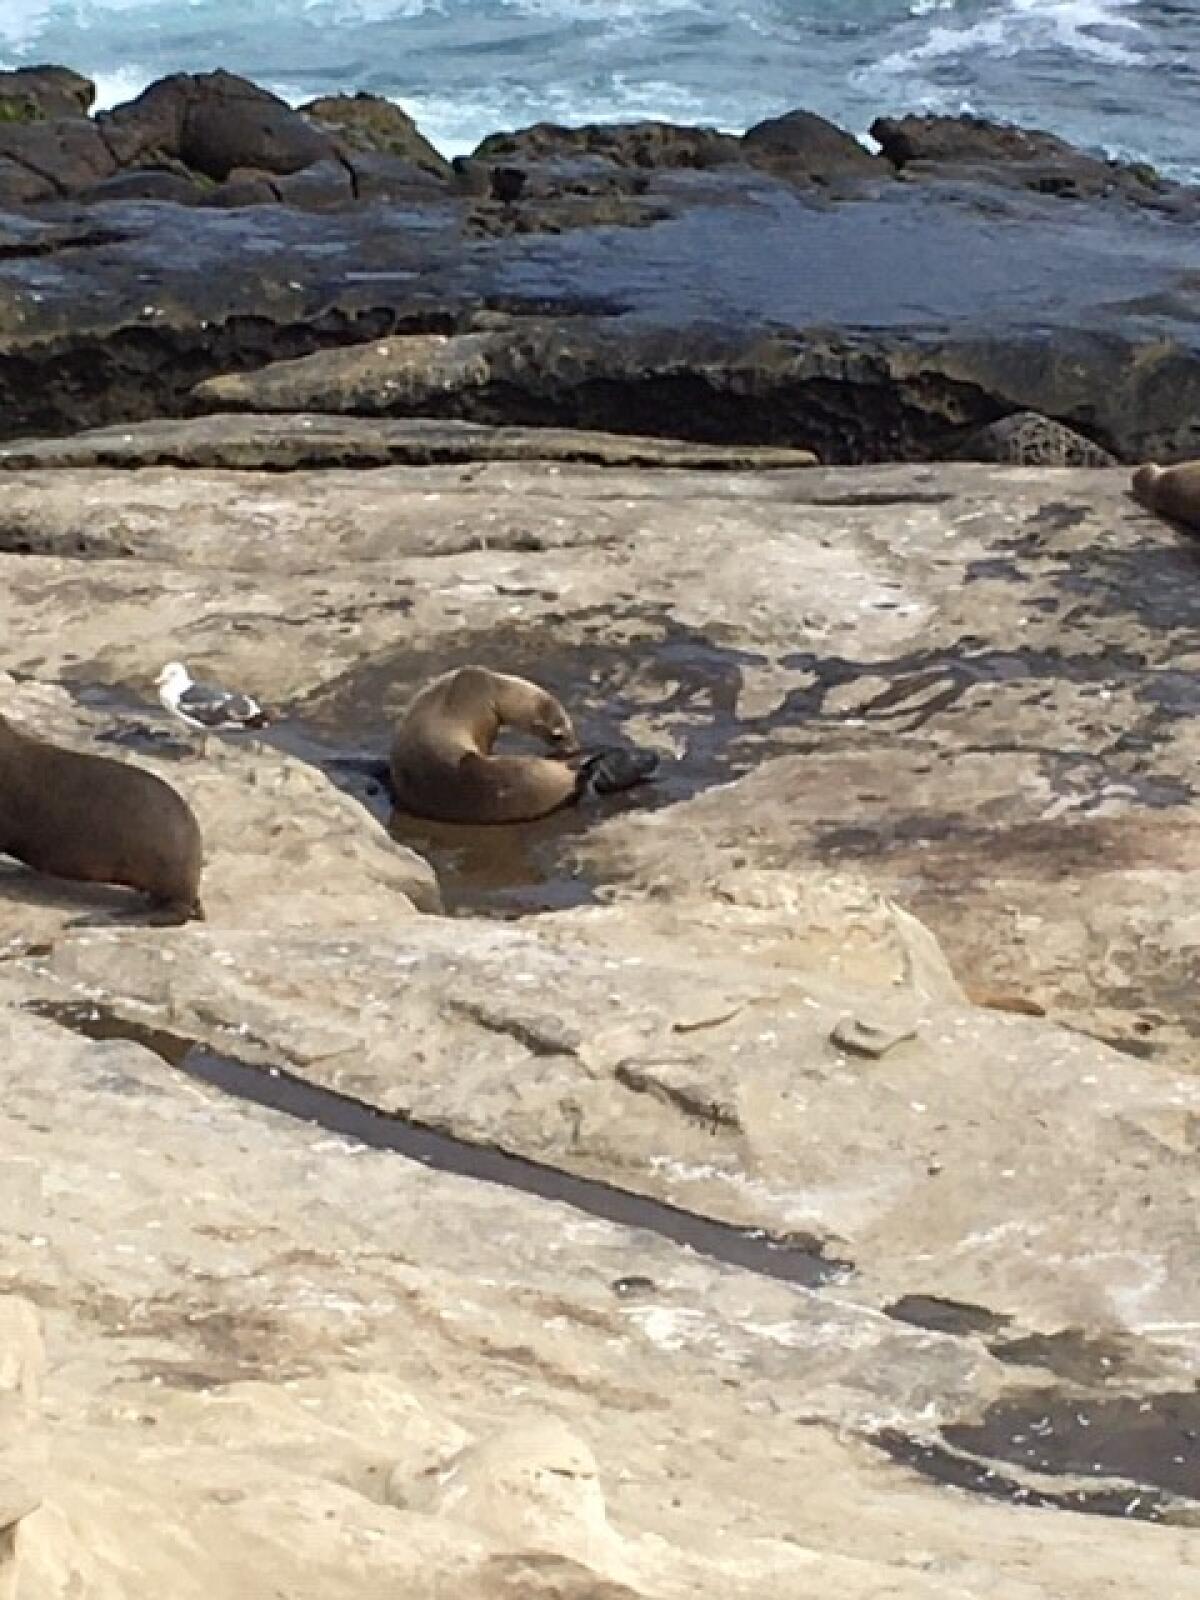 Deanne Monte provided this photo recently of a sea lion giving birth to a pup near La Jolla Cove.